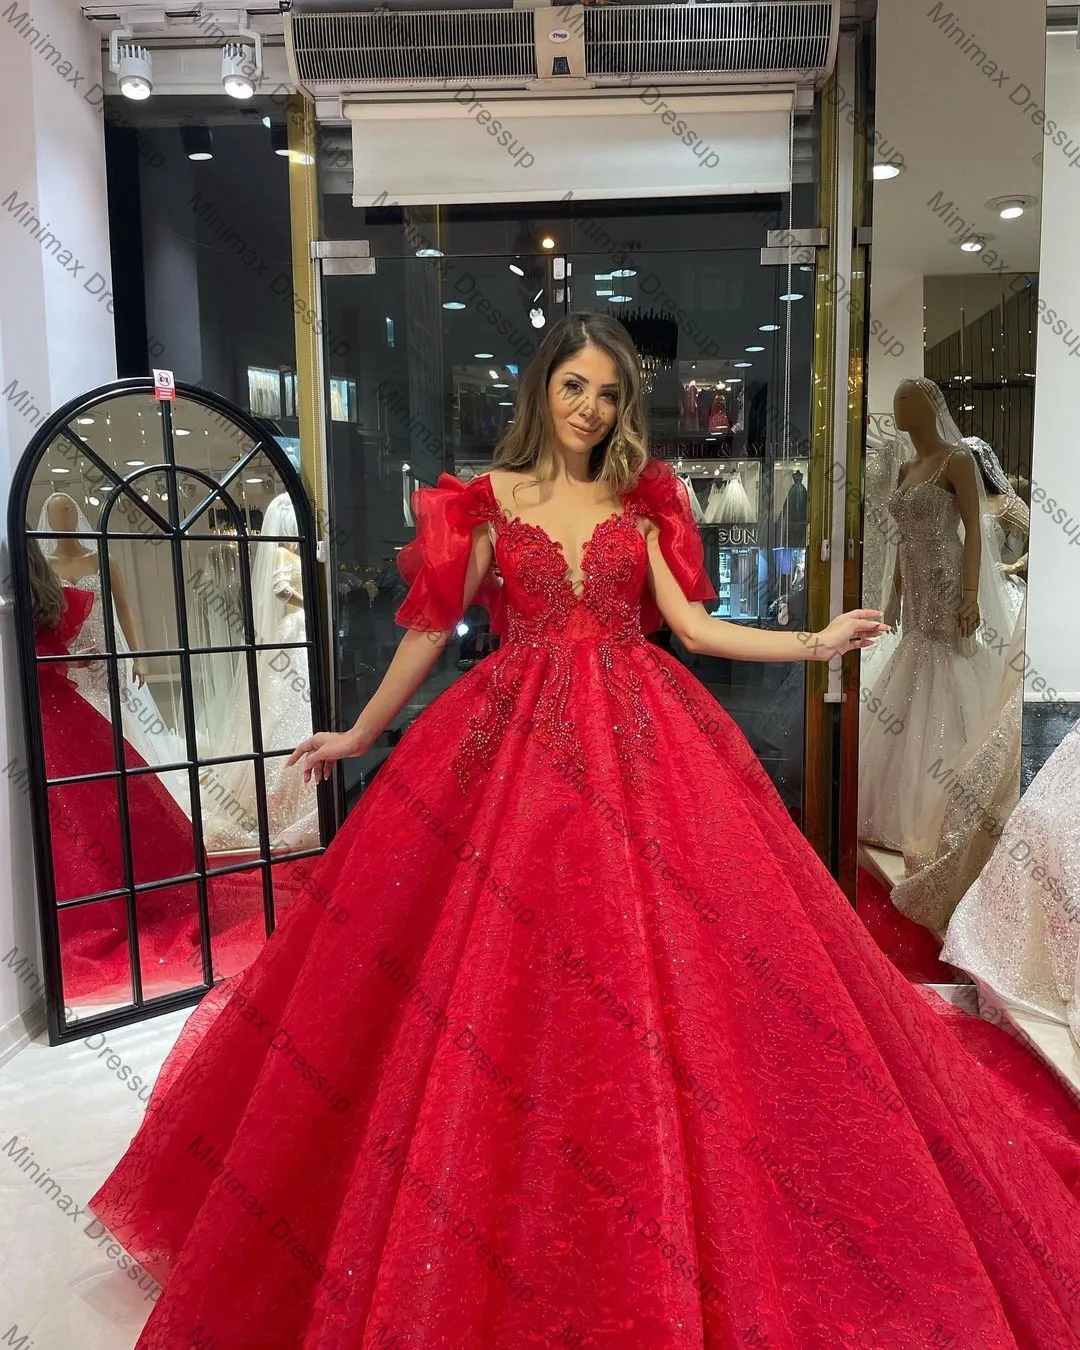 Sweetheart Puffy Prom Dresses Dubai Design Ball Gown Dress For Weddings  Evening Gowns Tulle Tiered Evening Gown Party Ni